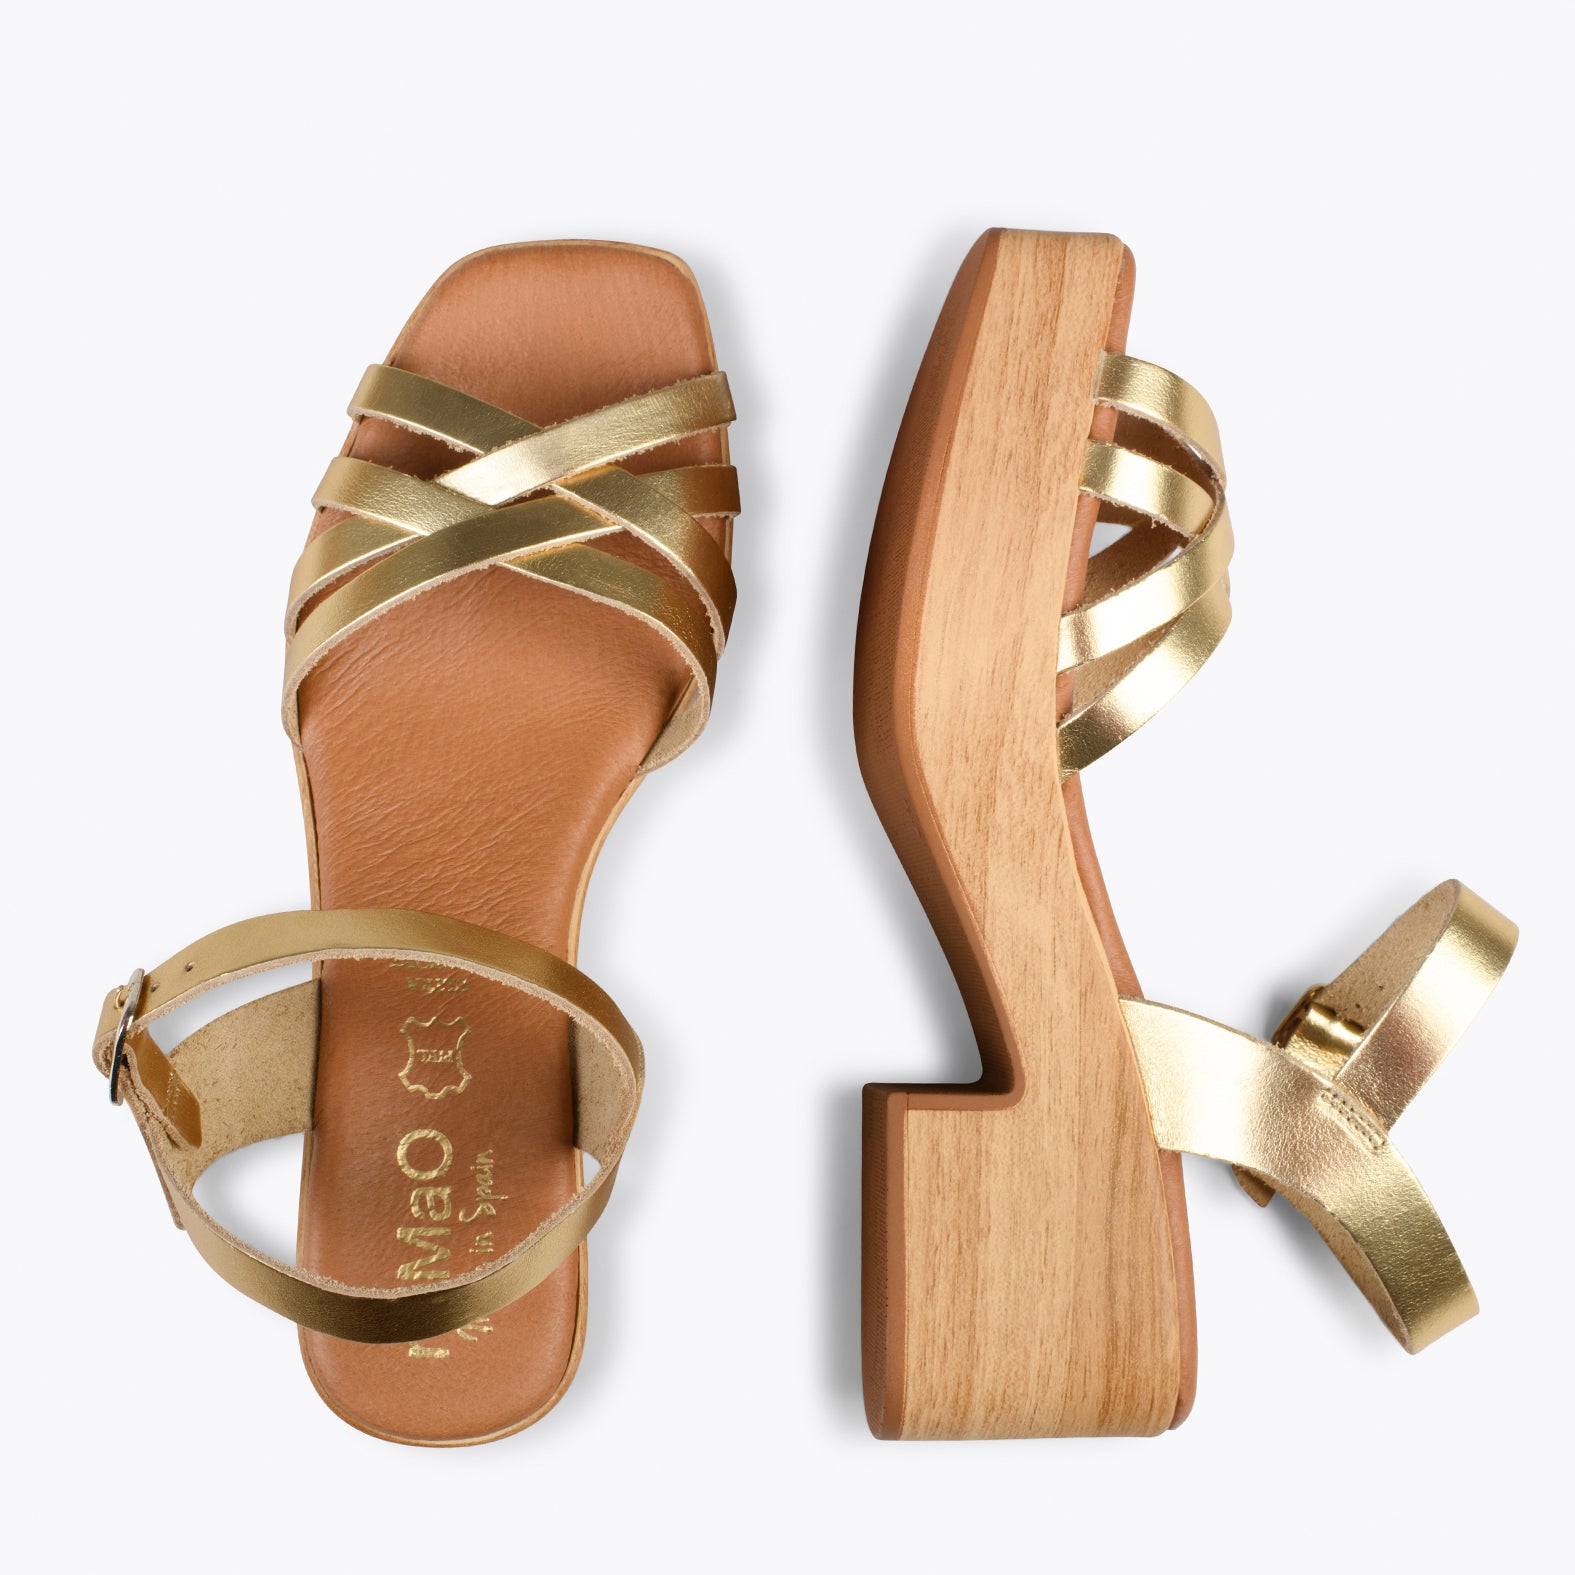 WOOD – GOLD strappy sandal with wooden heel